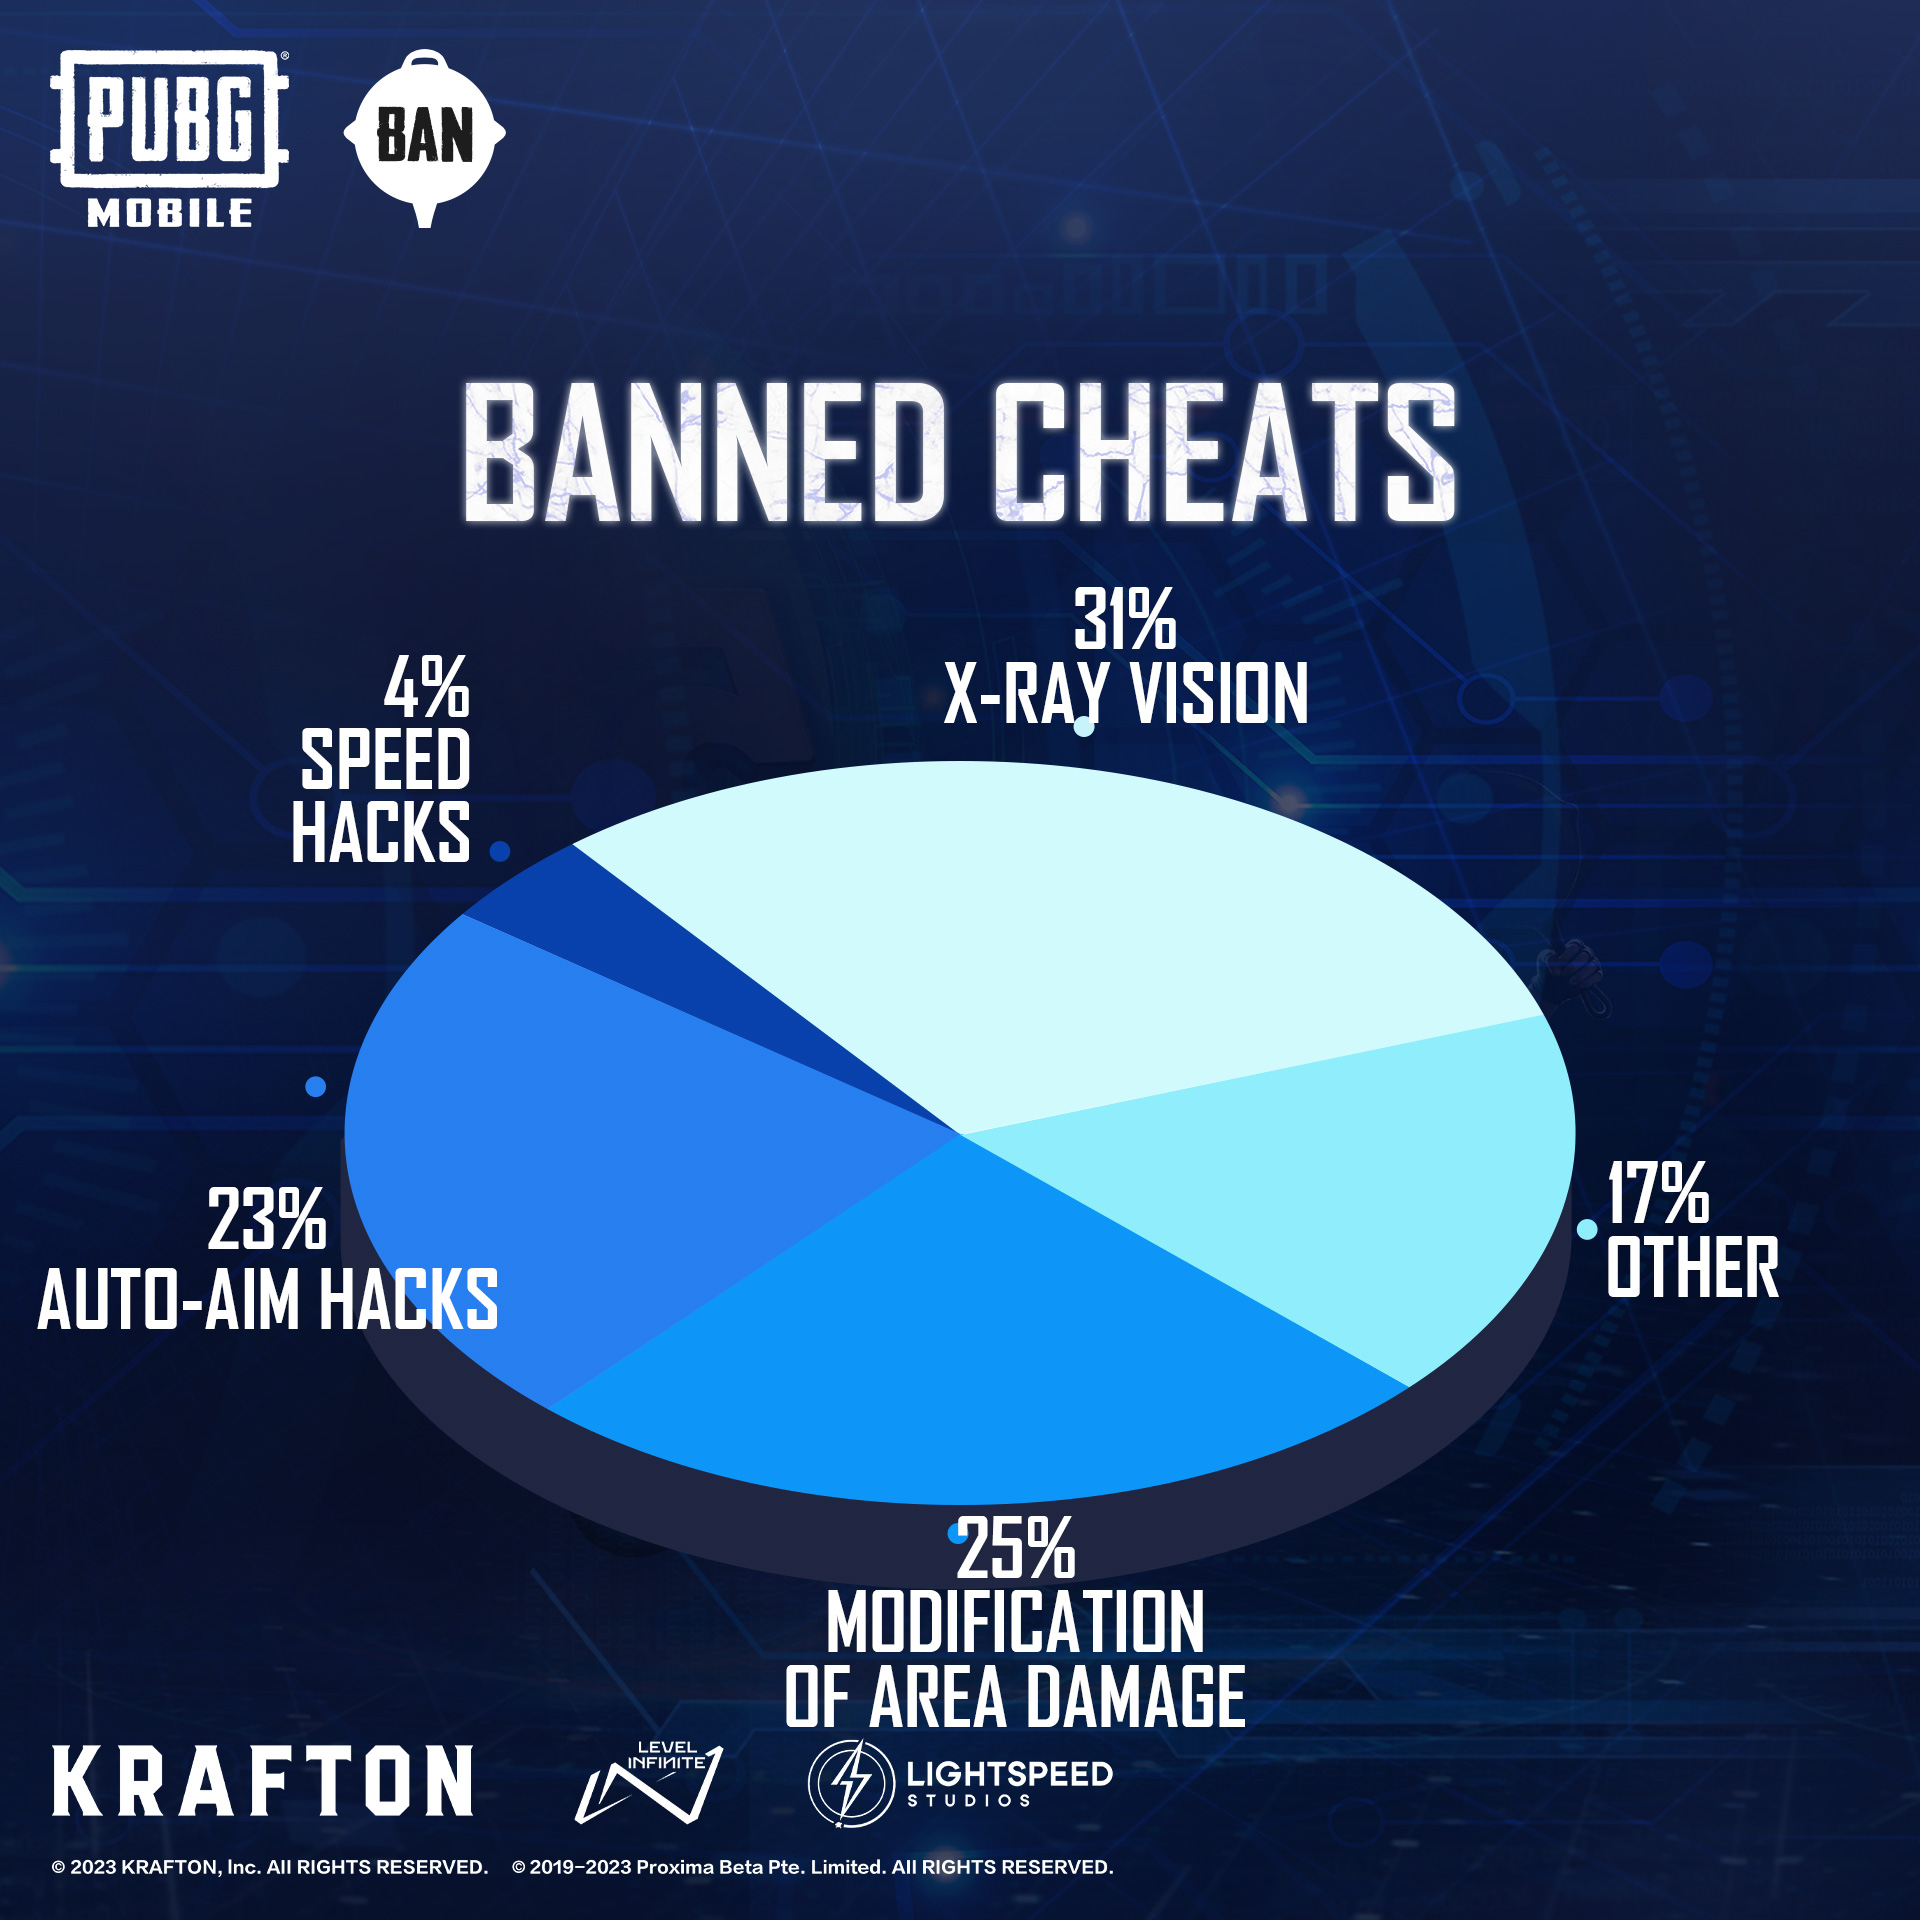 PUBG Mobile Anti Cheat Report Week 13: PUBG Mobile Ban Pan 2.0 permanently suspended 170449 accounts for cheating, CHECK FULL REPORT